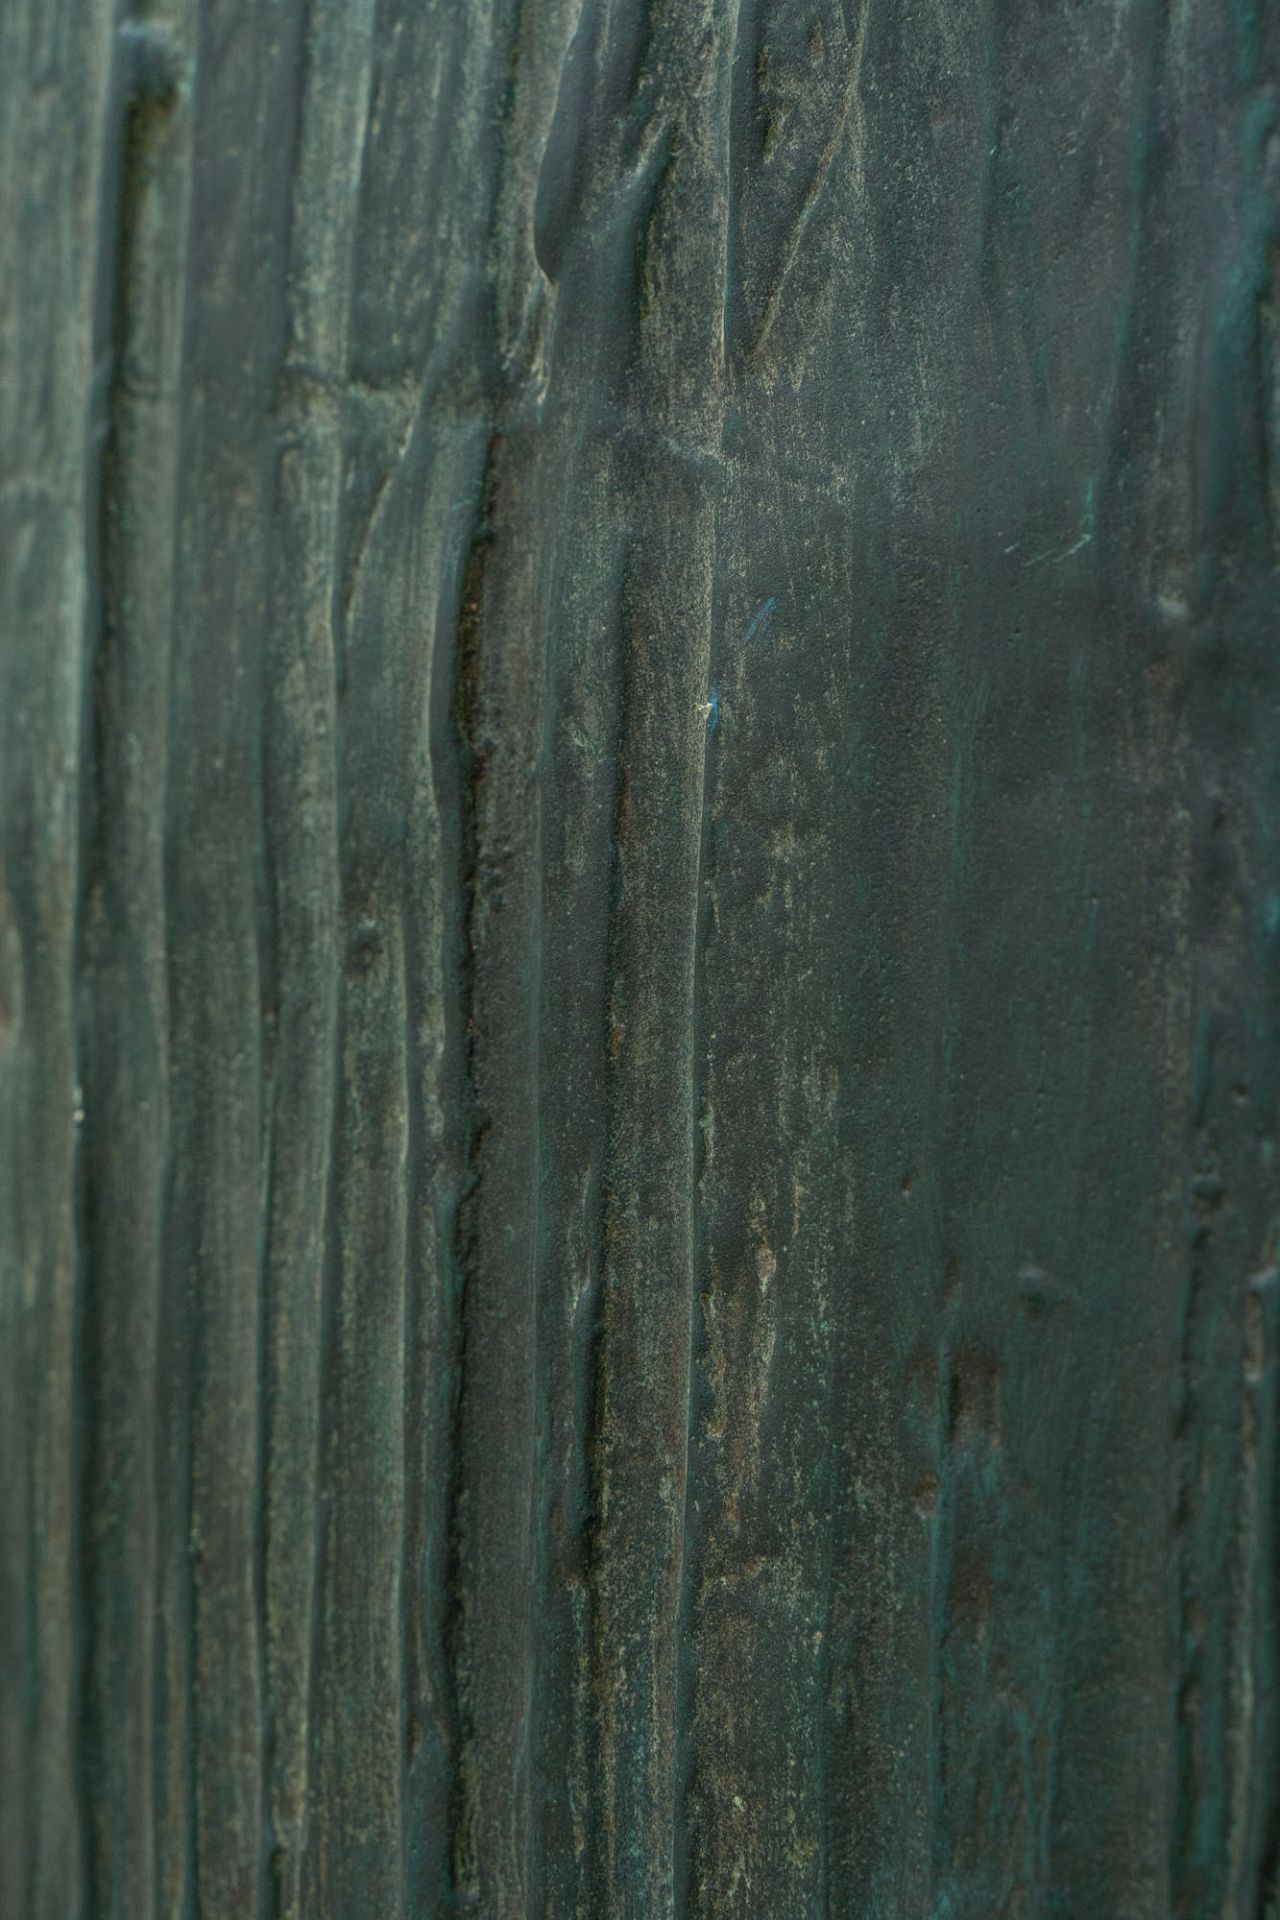 Günther Förg, Untitled (Large bronze relief).Bronze with dark green patina. (1986). Ca. 122 x 71 x 7 - Image 5 of 6